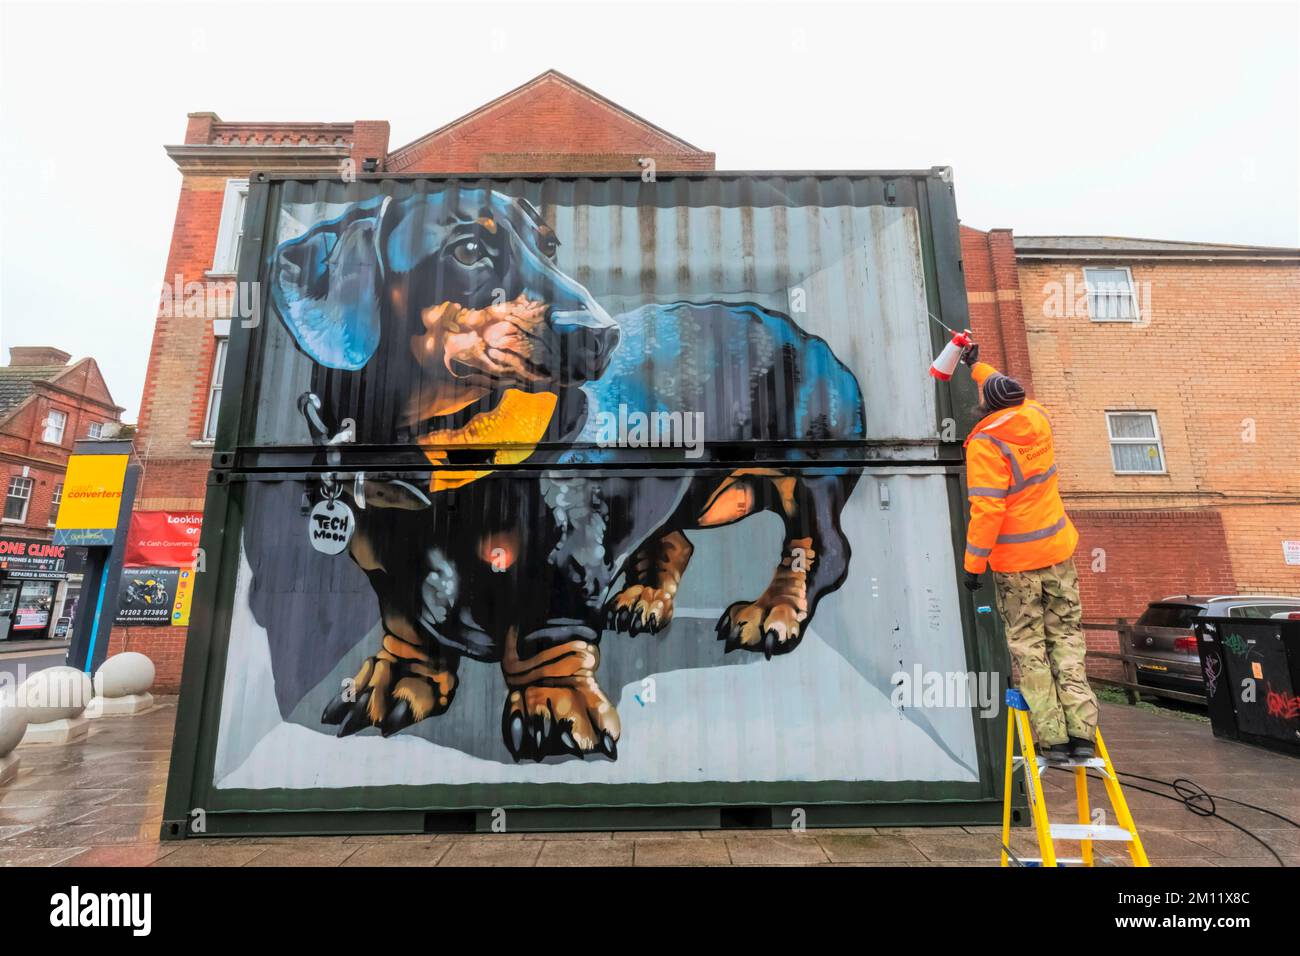 England, Dorset, Bournemouth, Boscombe, Council Worker Cleaning Street Art titled 'The Sausage Dog' by the Artist Tech Moon Stock Photo